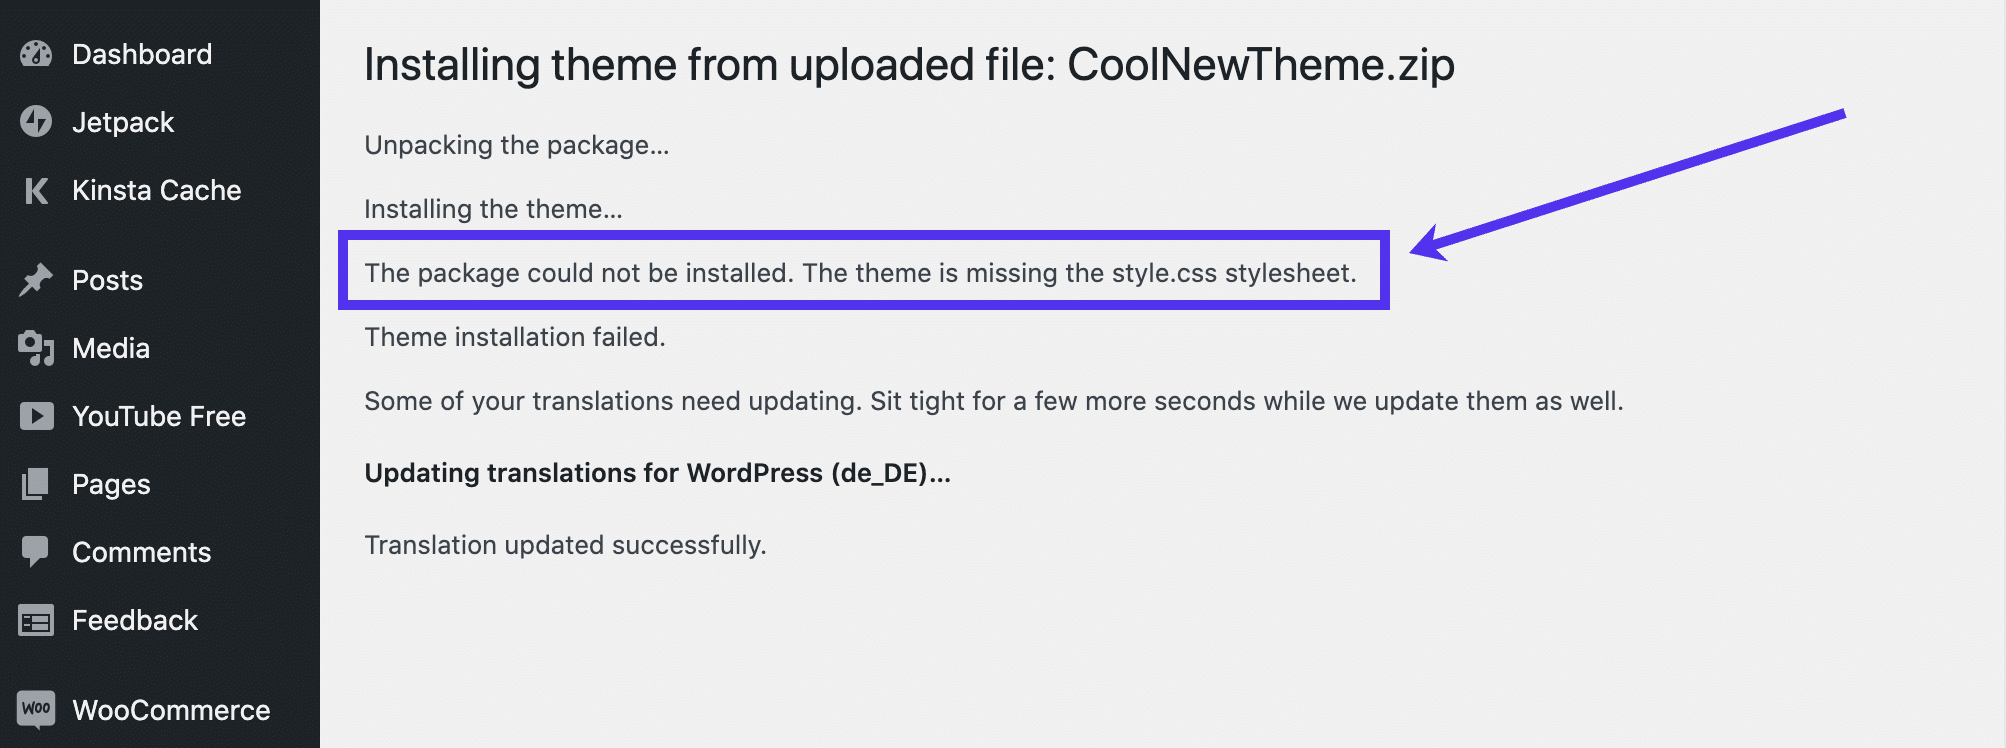 The package could not be installed. The theme is missing the style.css stylesheet